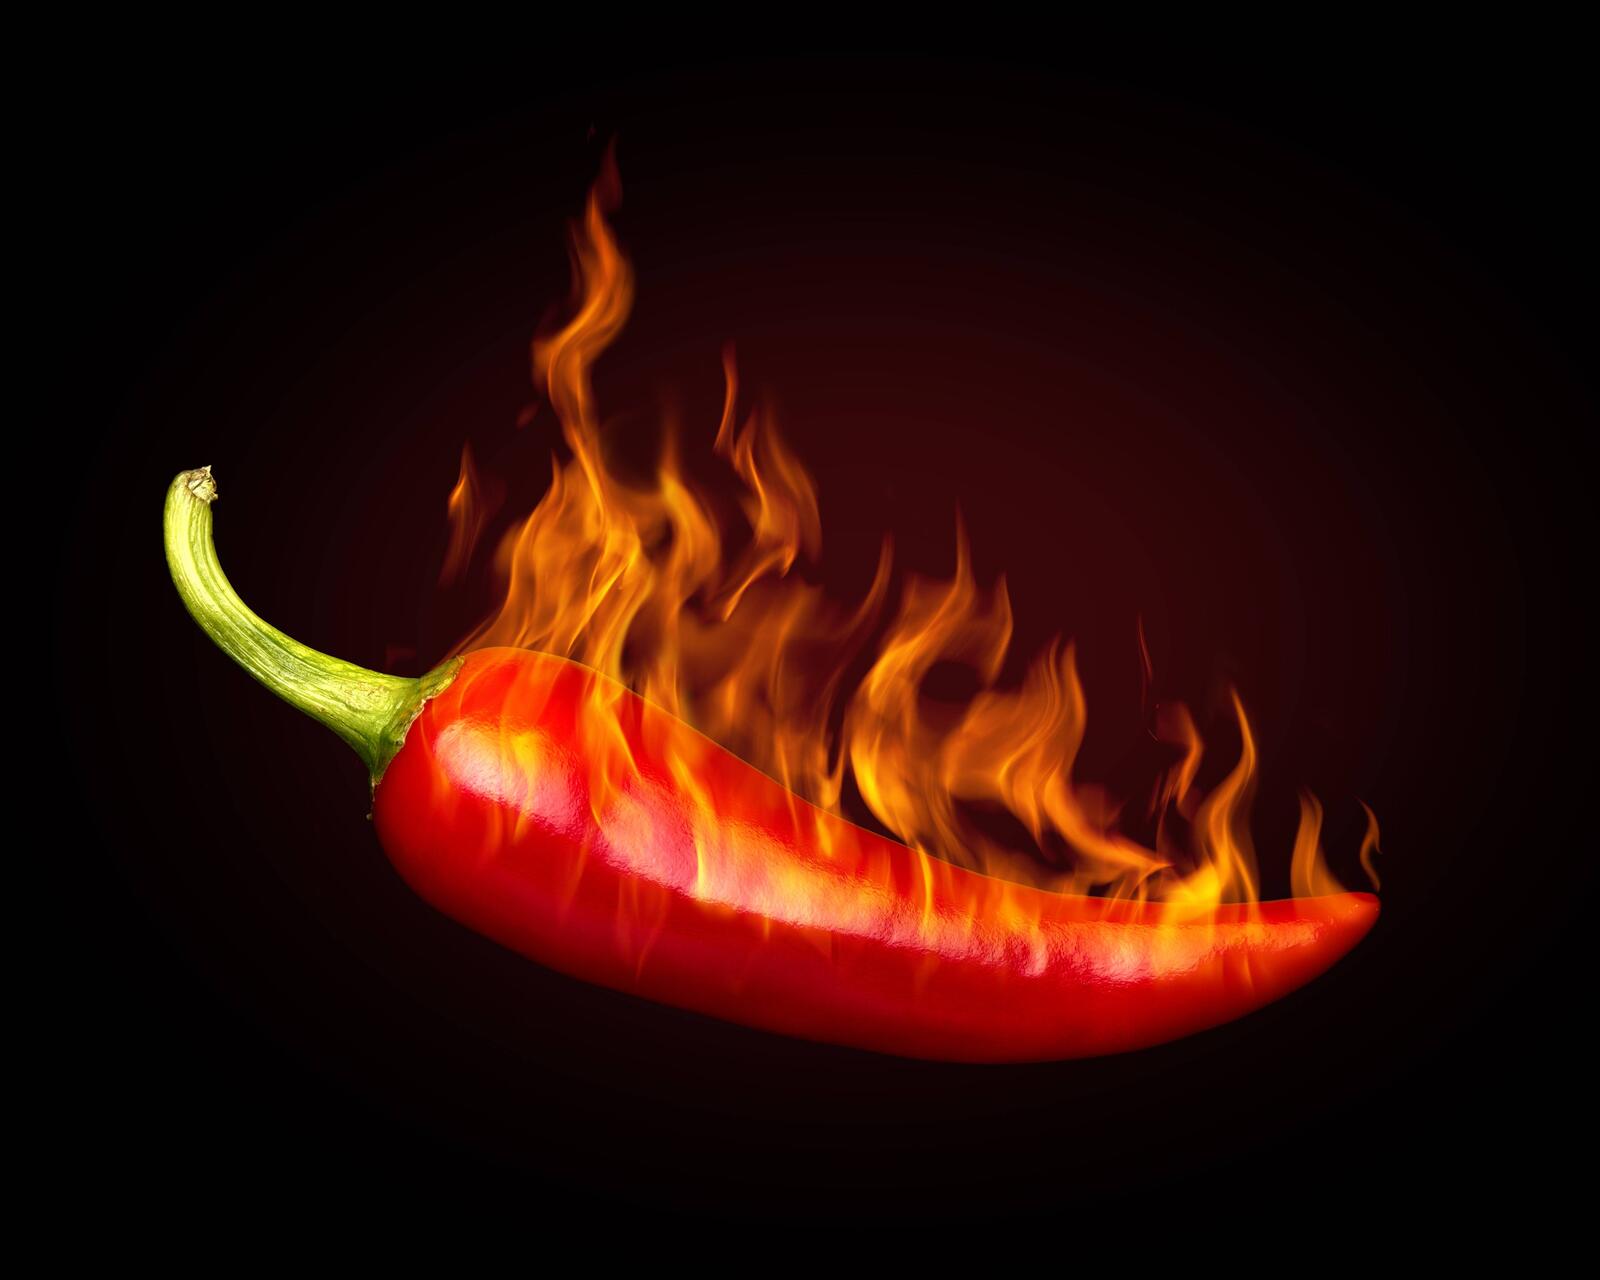 Wallpapers chili food burning on the desktop